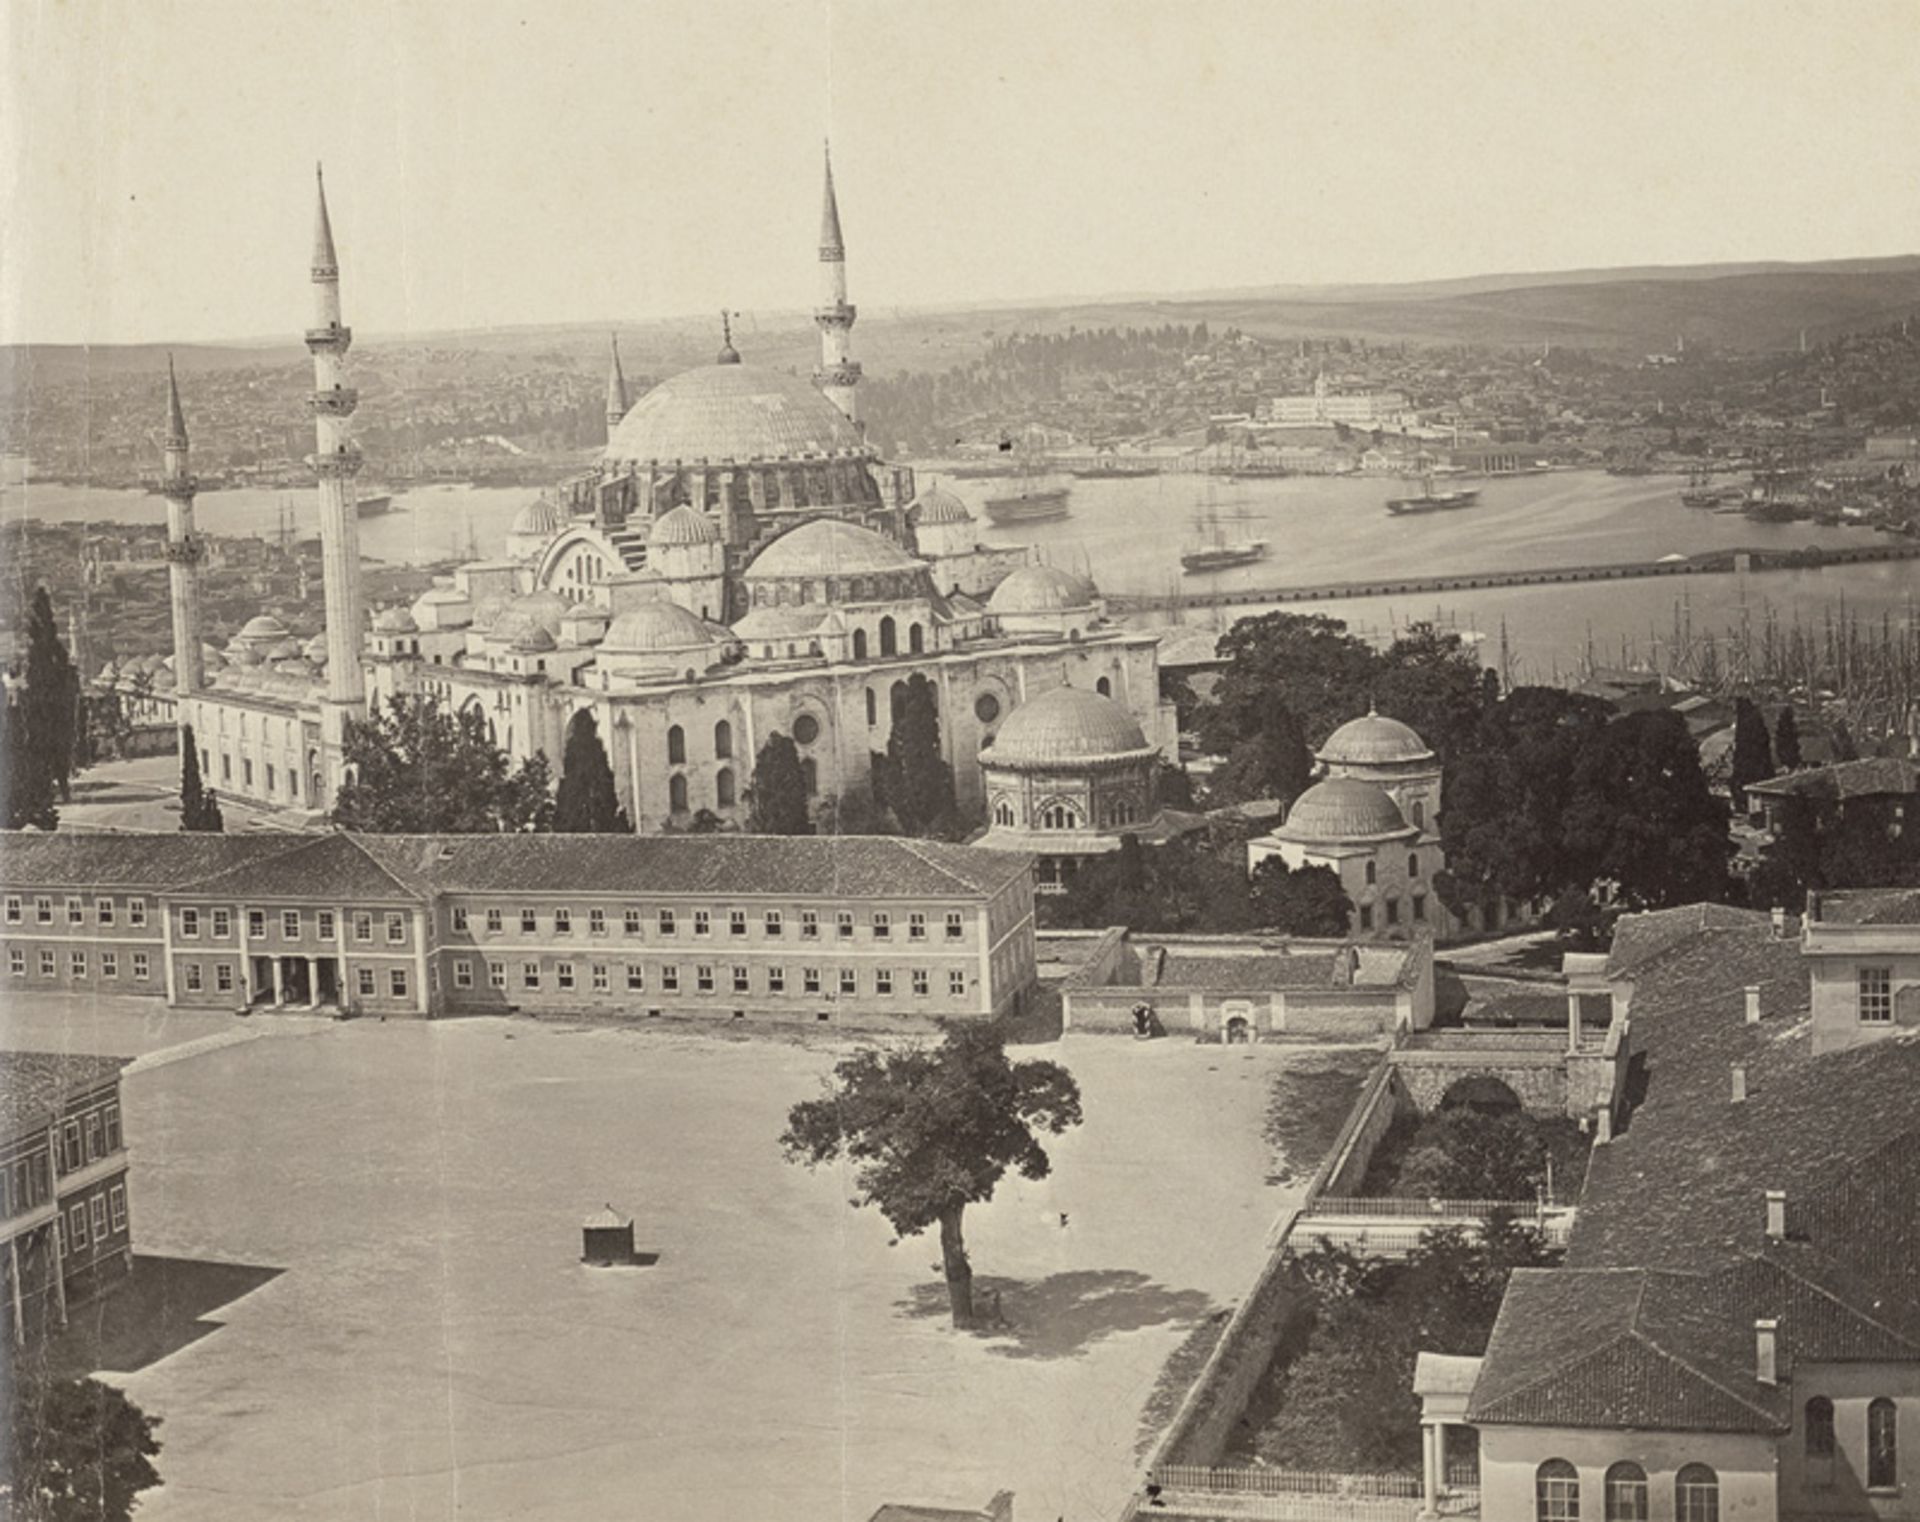 Robertson, James and Felice Beato: Panorama of Constantinople